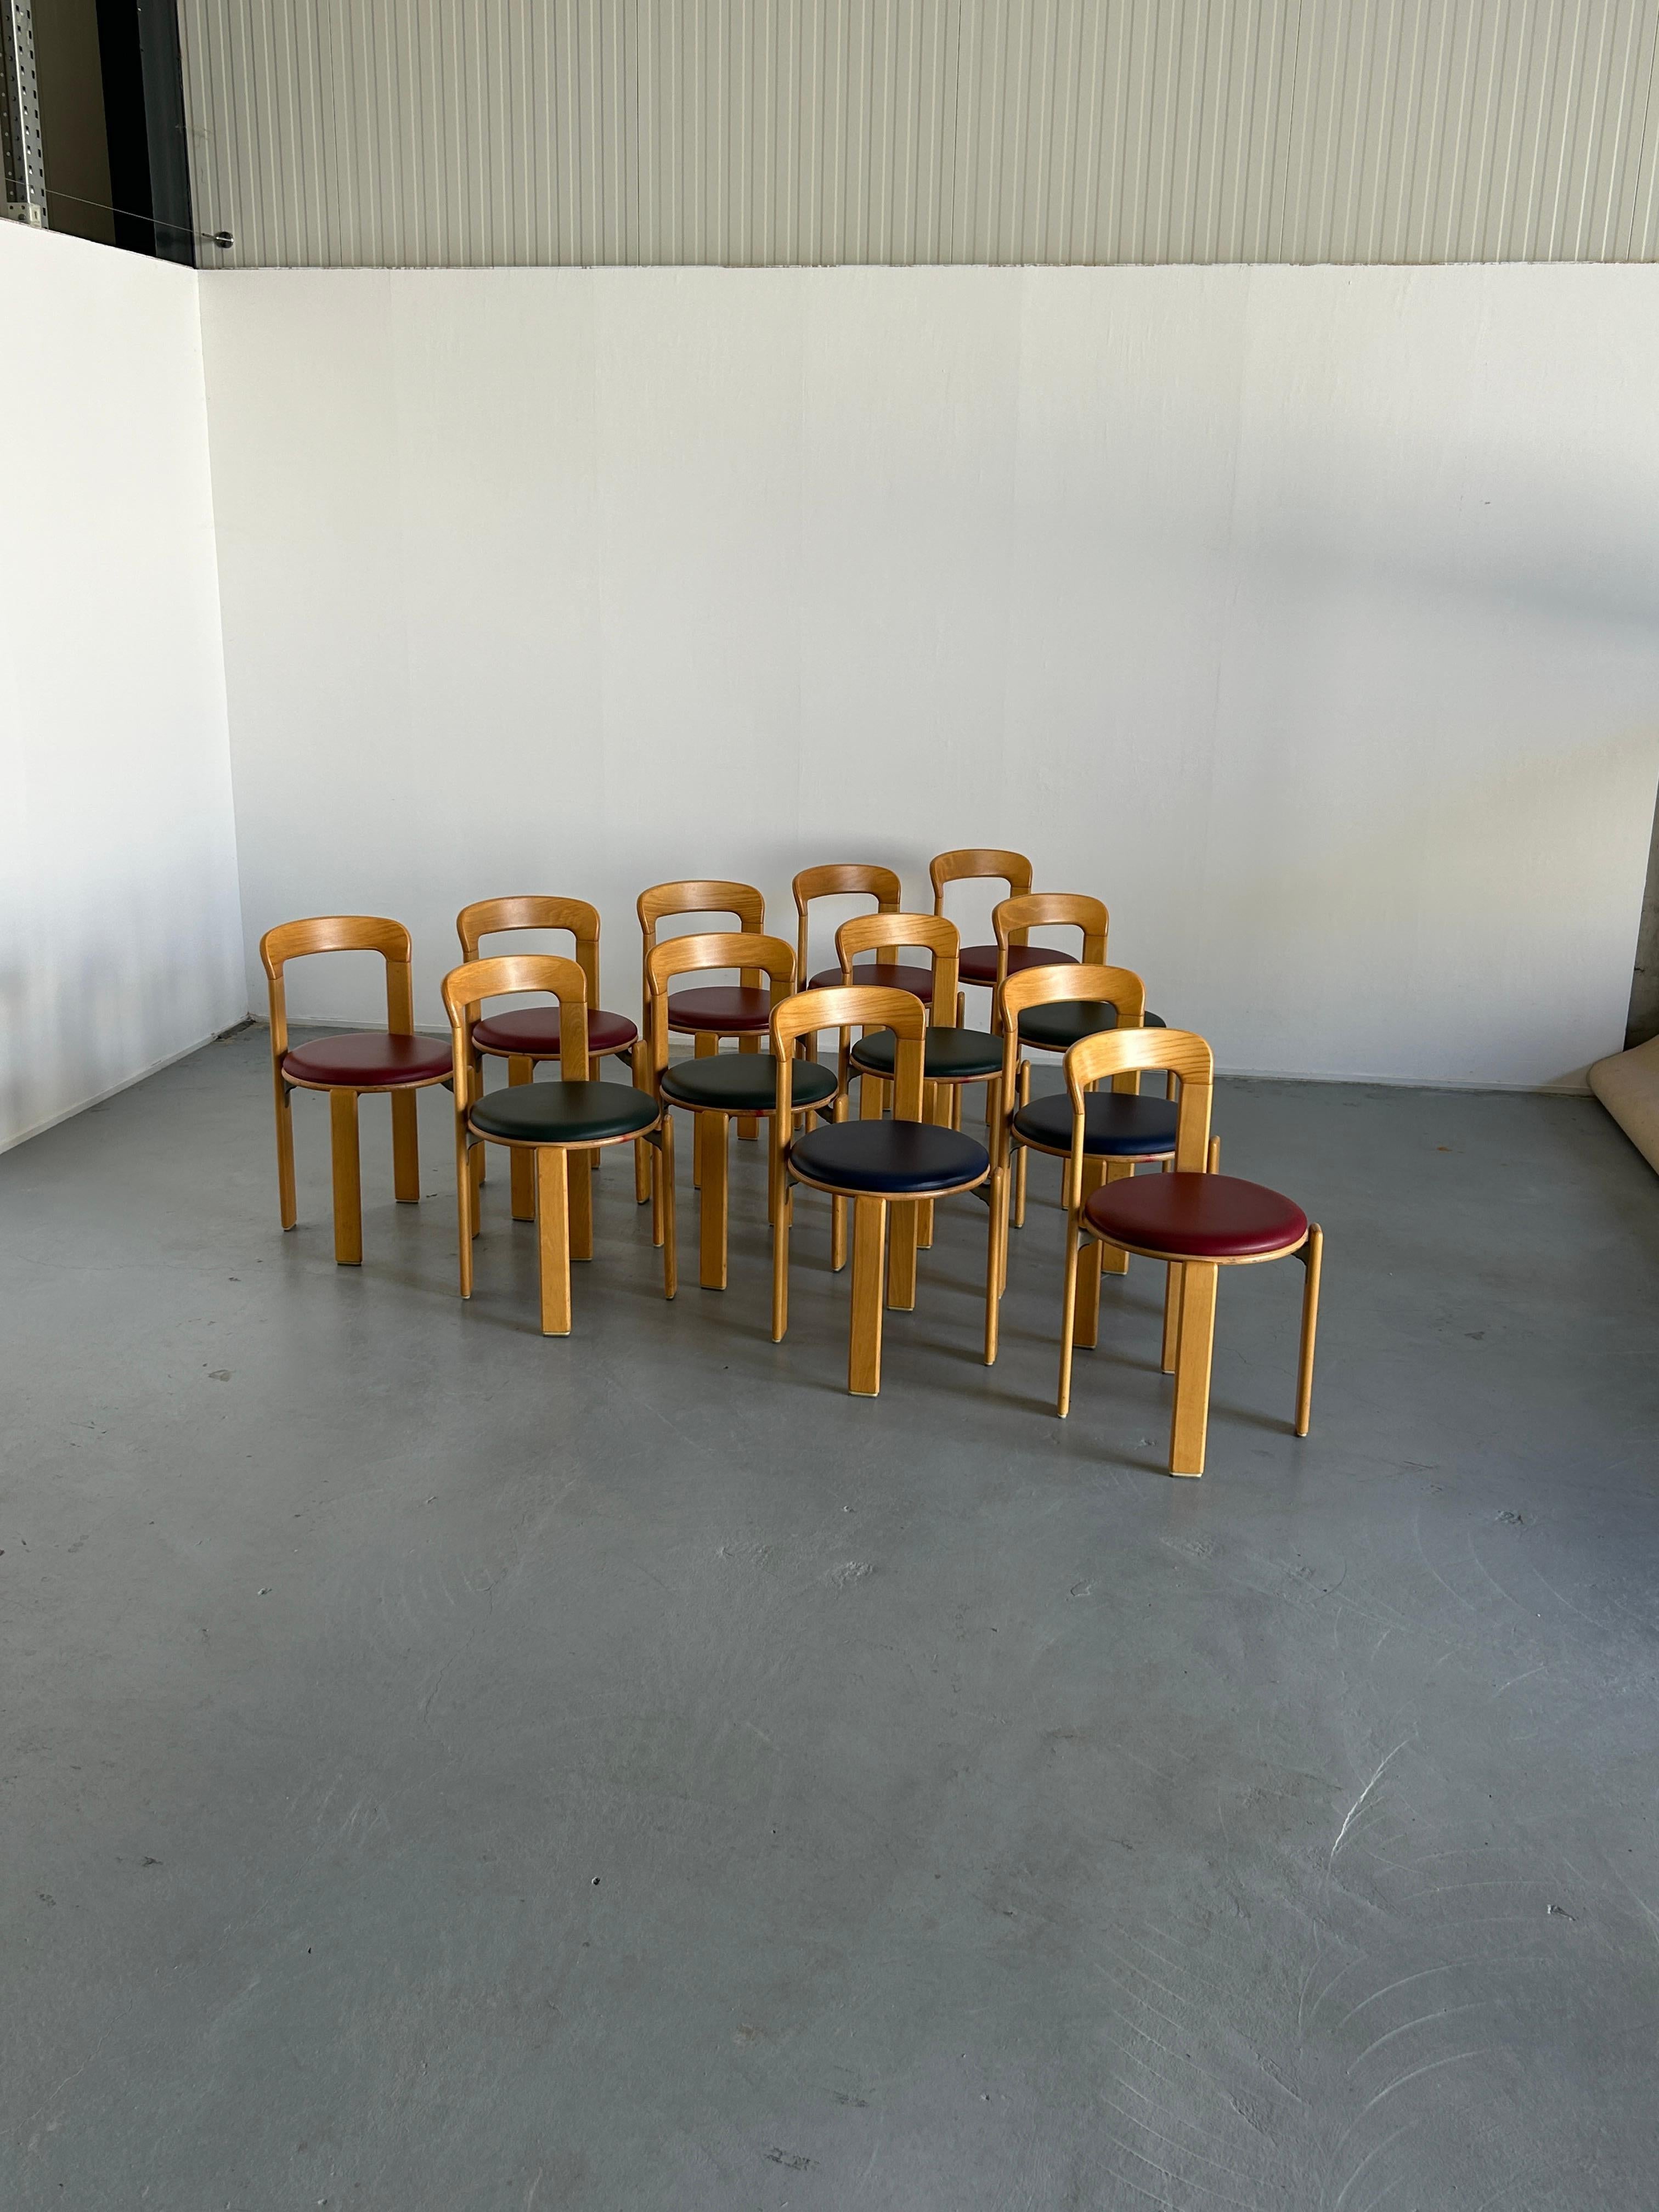 Set of twelve Mid-Century-Modern dining chairs designed by Bruno Rey in the 1970s.
Iconic design, produced by the well known Germany manufacturer Kusch+Co in the early 1990s..

The dining chairs were made of solid beech, laminated plywood beech and